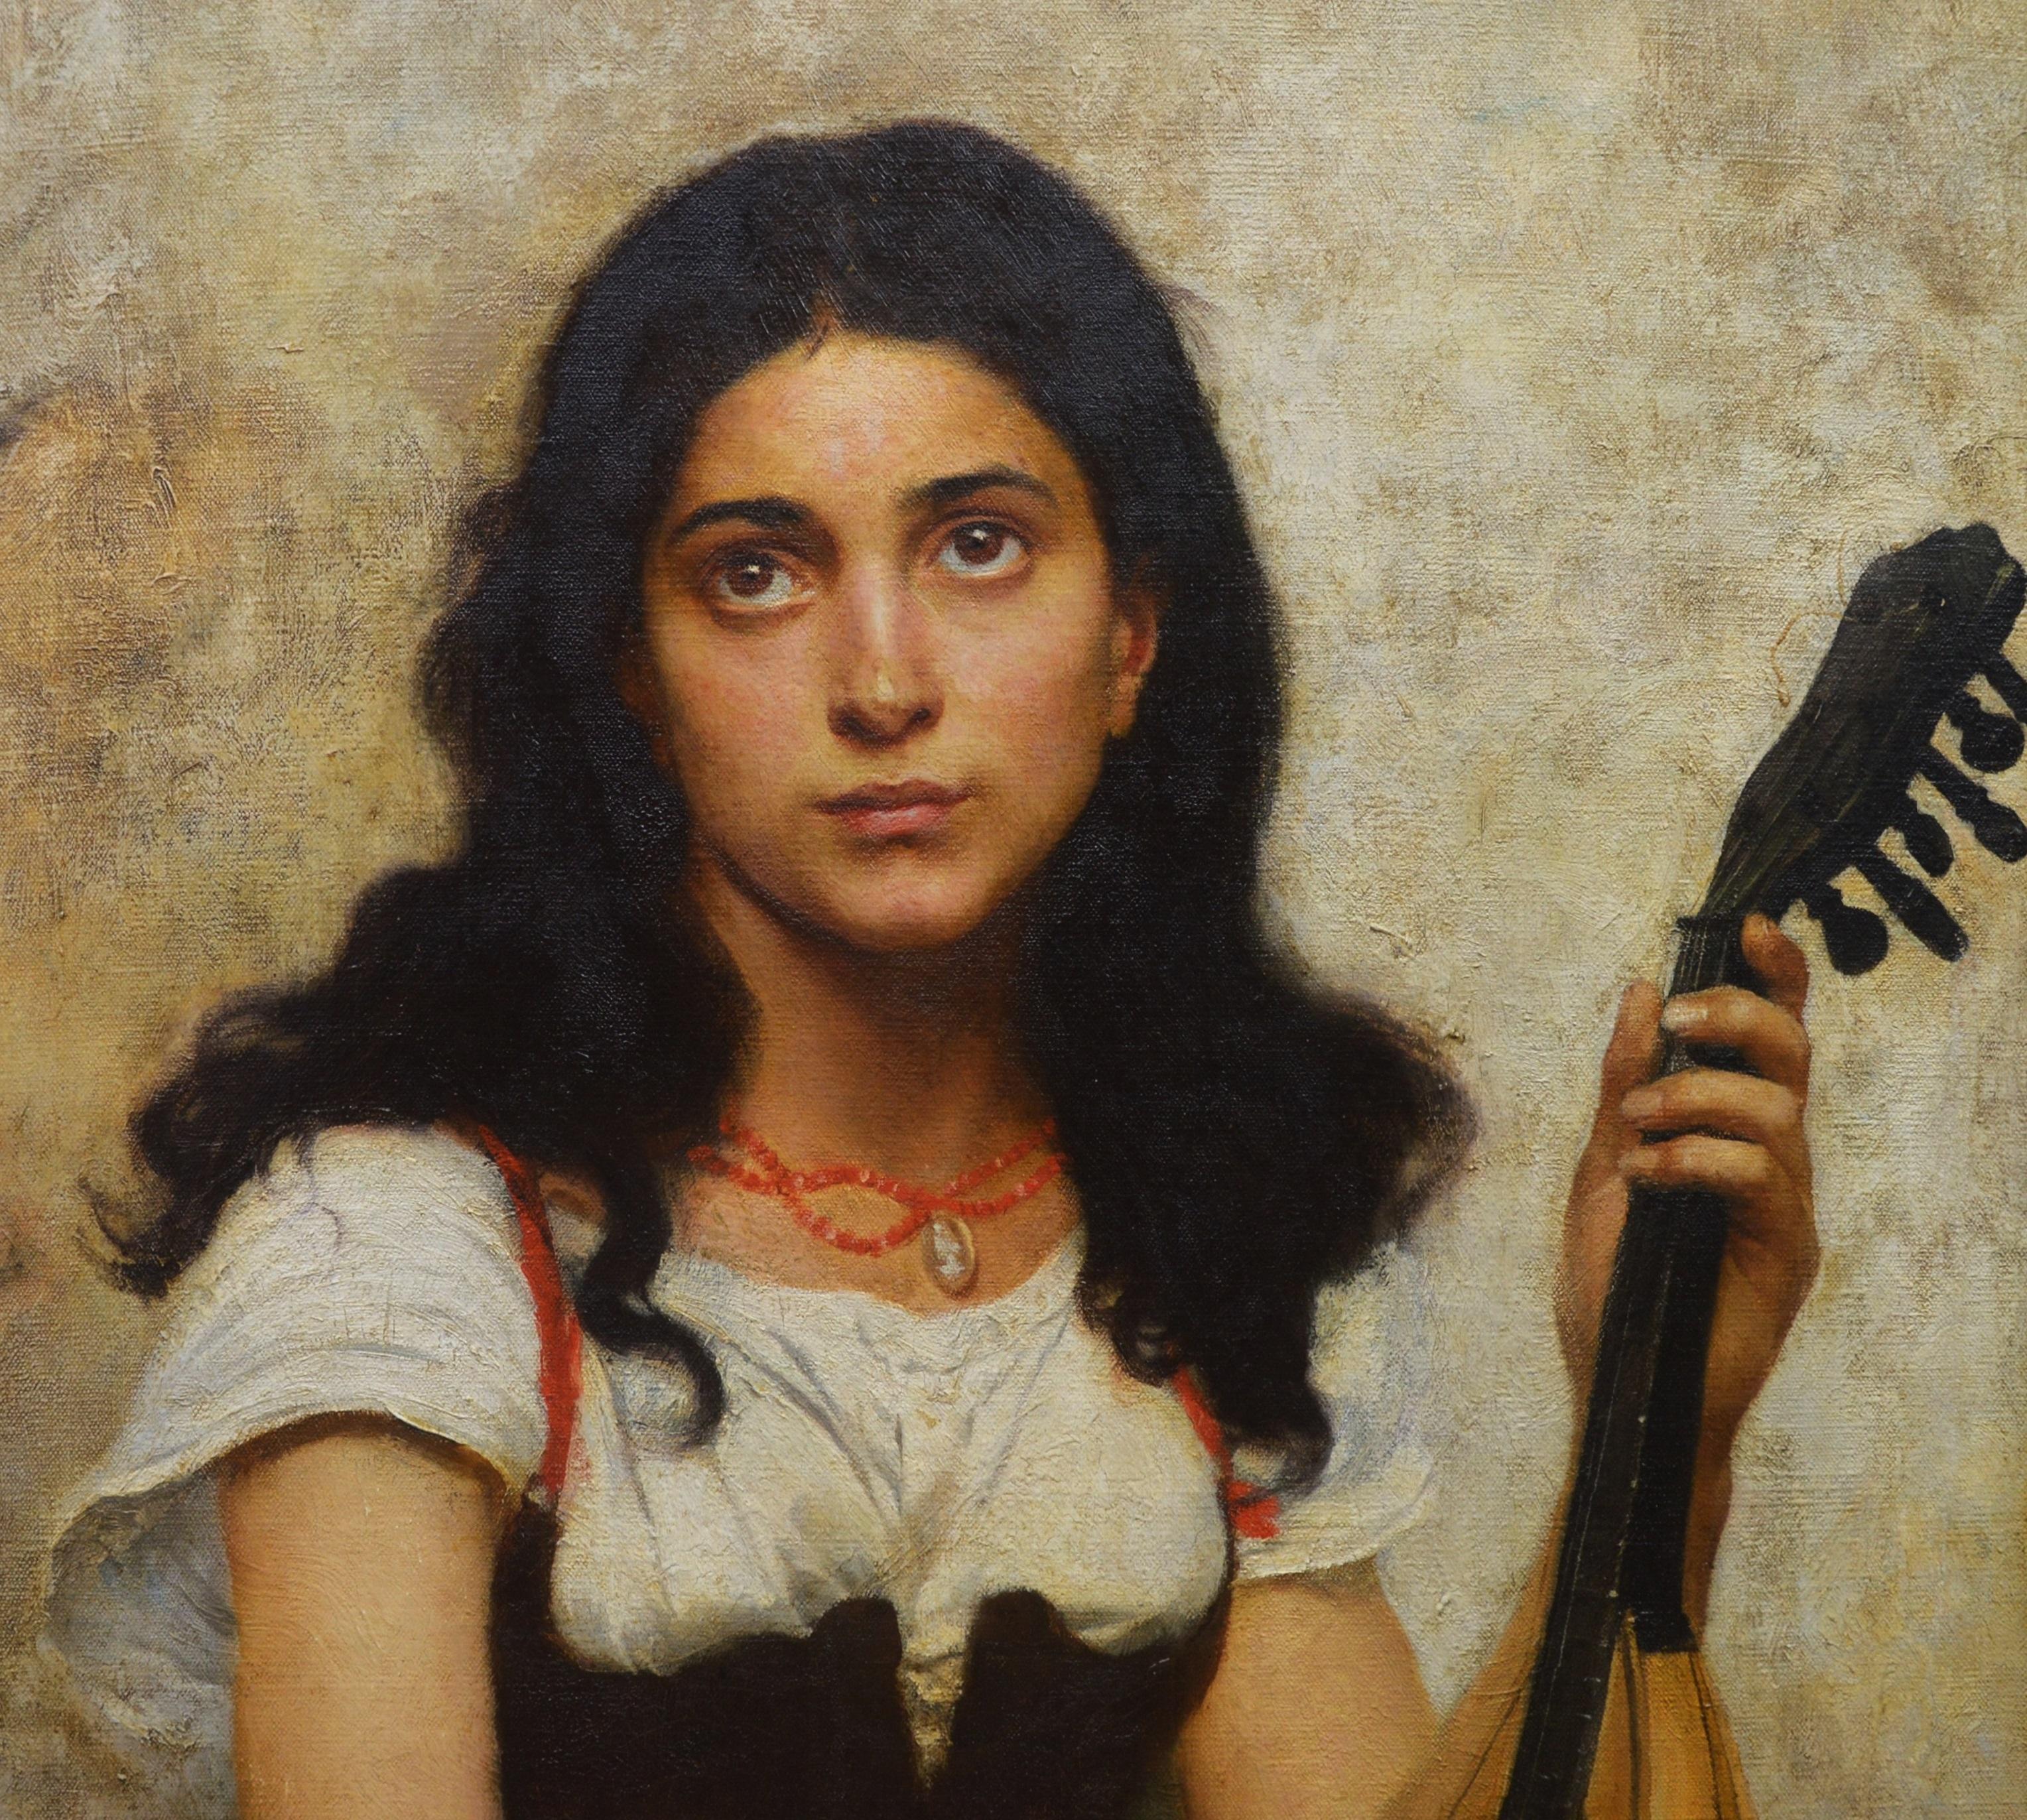 This is a very large fine 19th century French Belle Epoque oil on canvas depicting a girl holding a mandolin by the eminent Parisian painter Édouard Vimont (1846-1930). ‘La Jeune Musicienne’ is signed by the artist and dated 1889. 

As with all of